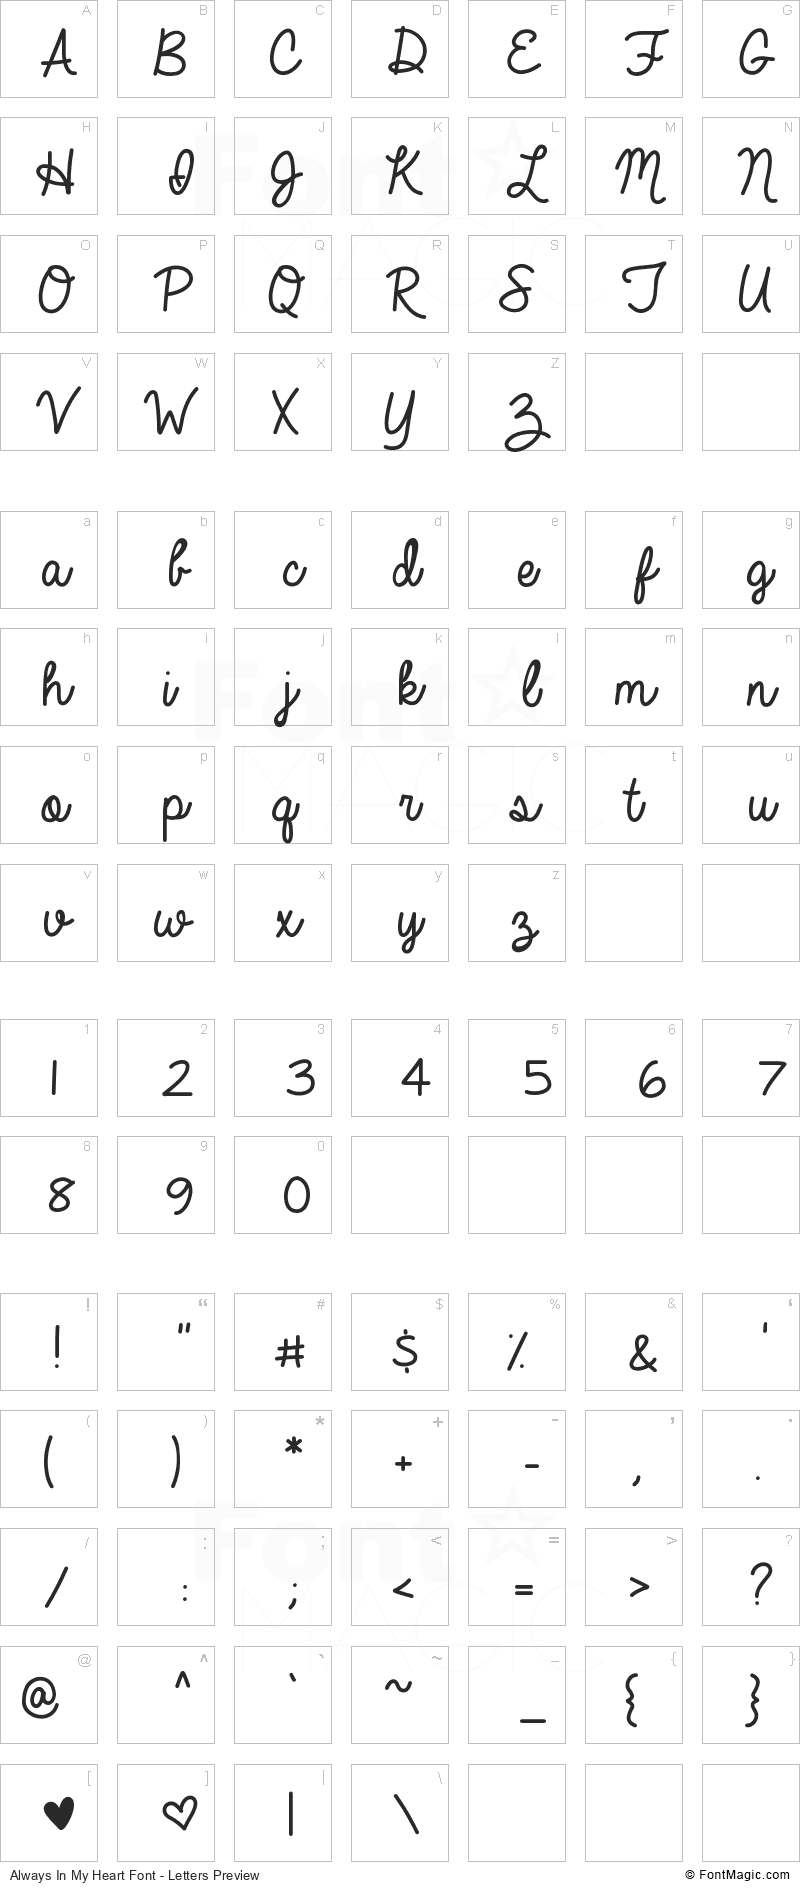 Always In My Heart Font - All Latters Preview Chart